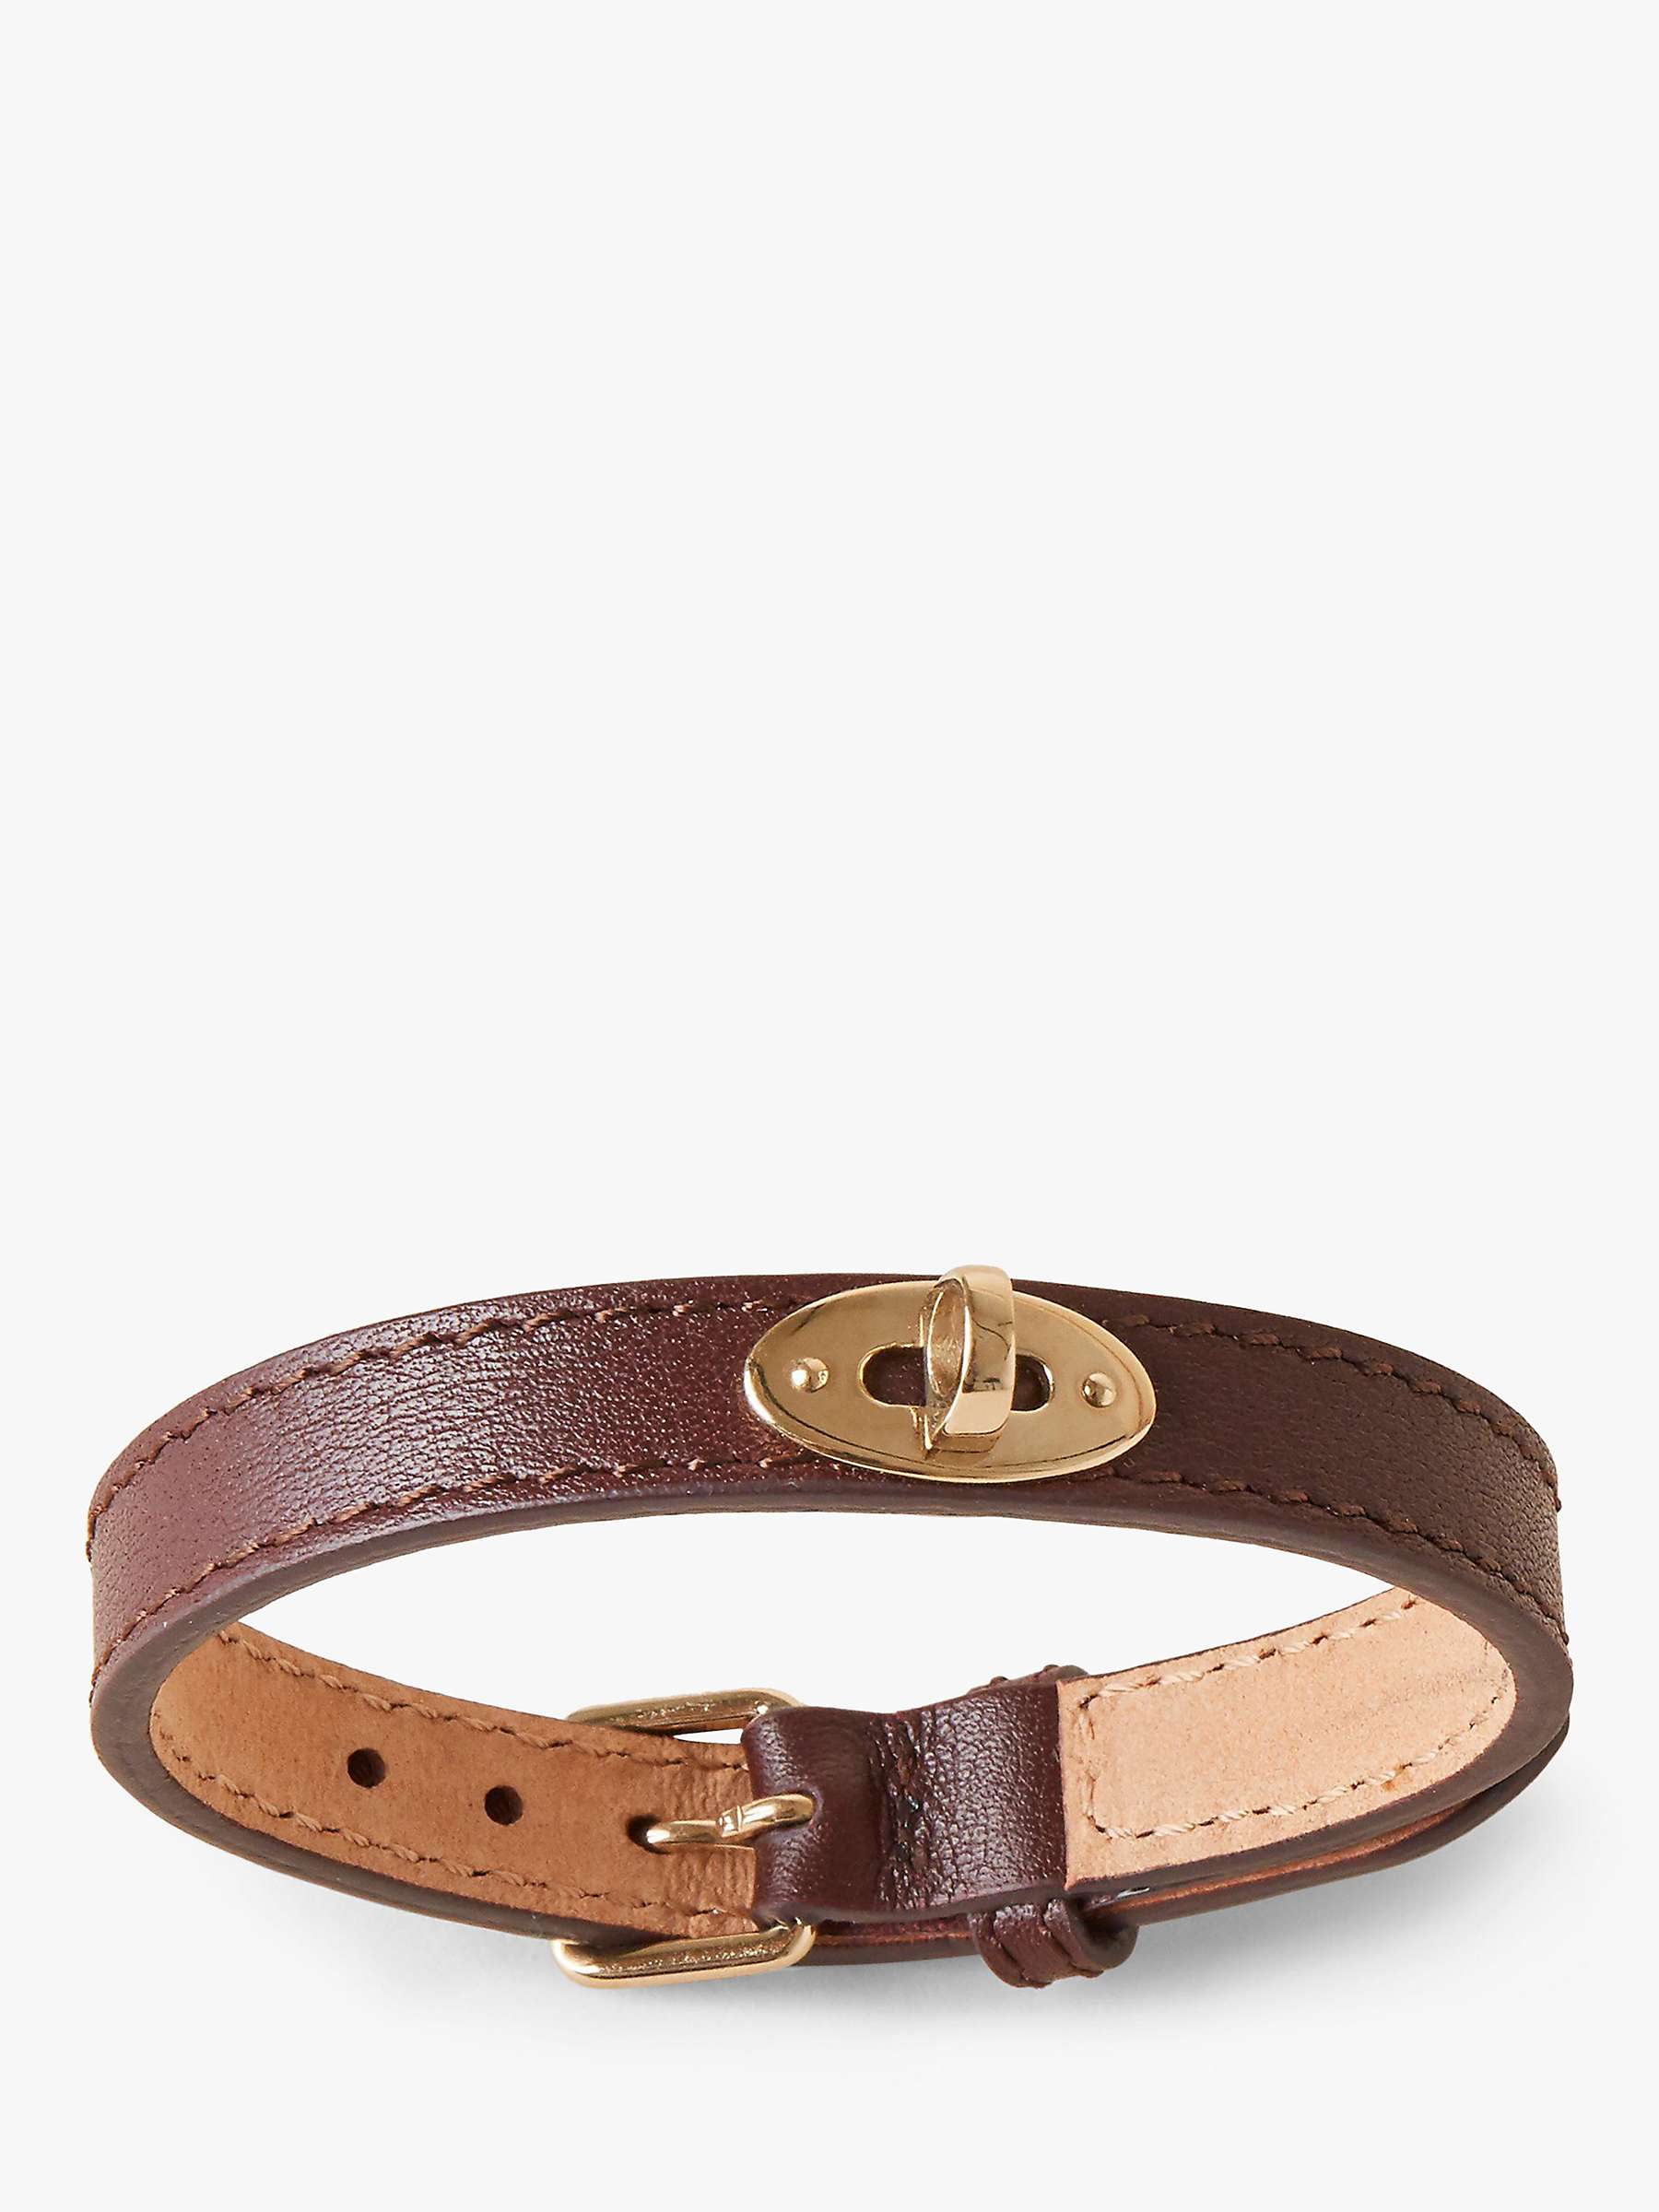 Buy Mulberry Bayswater Silky Calf Leather Thin Bracelet Online at johnlewis.com